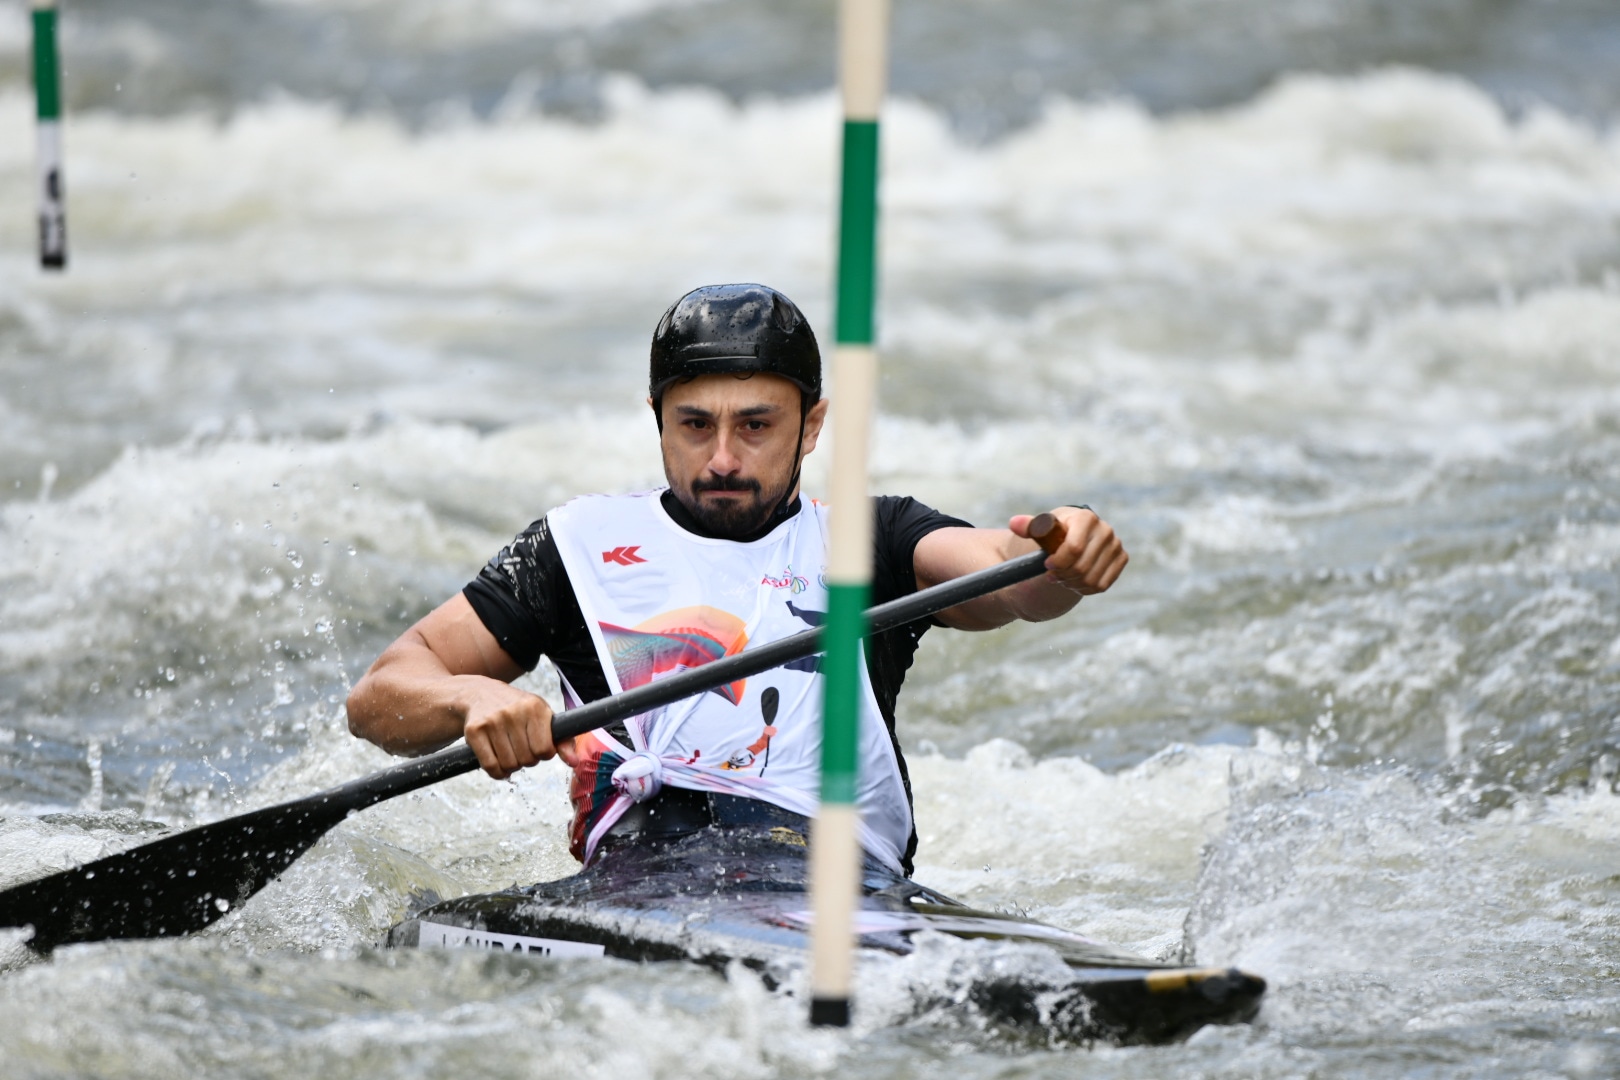 Paraguayans are located in the canoeing semifinal